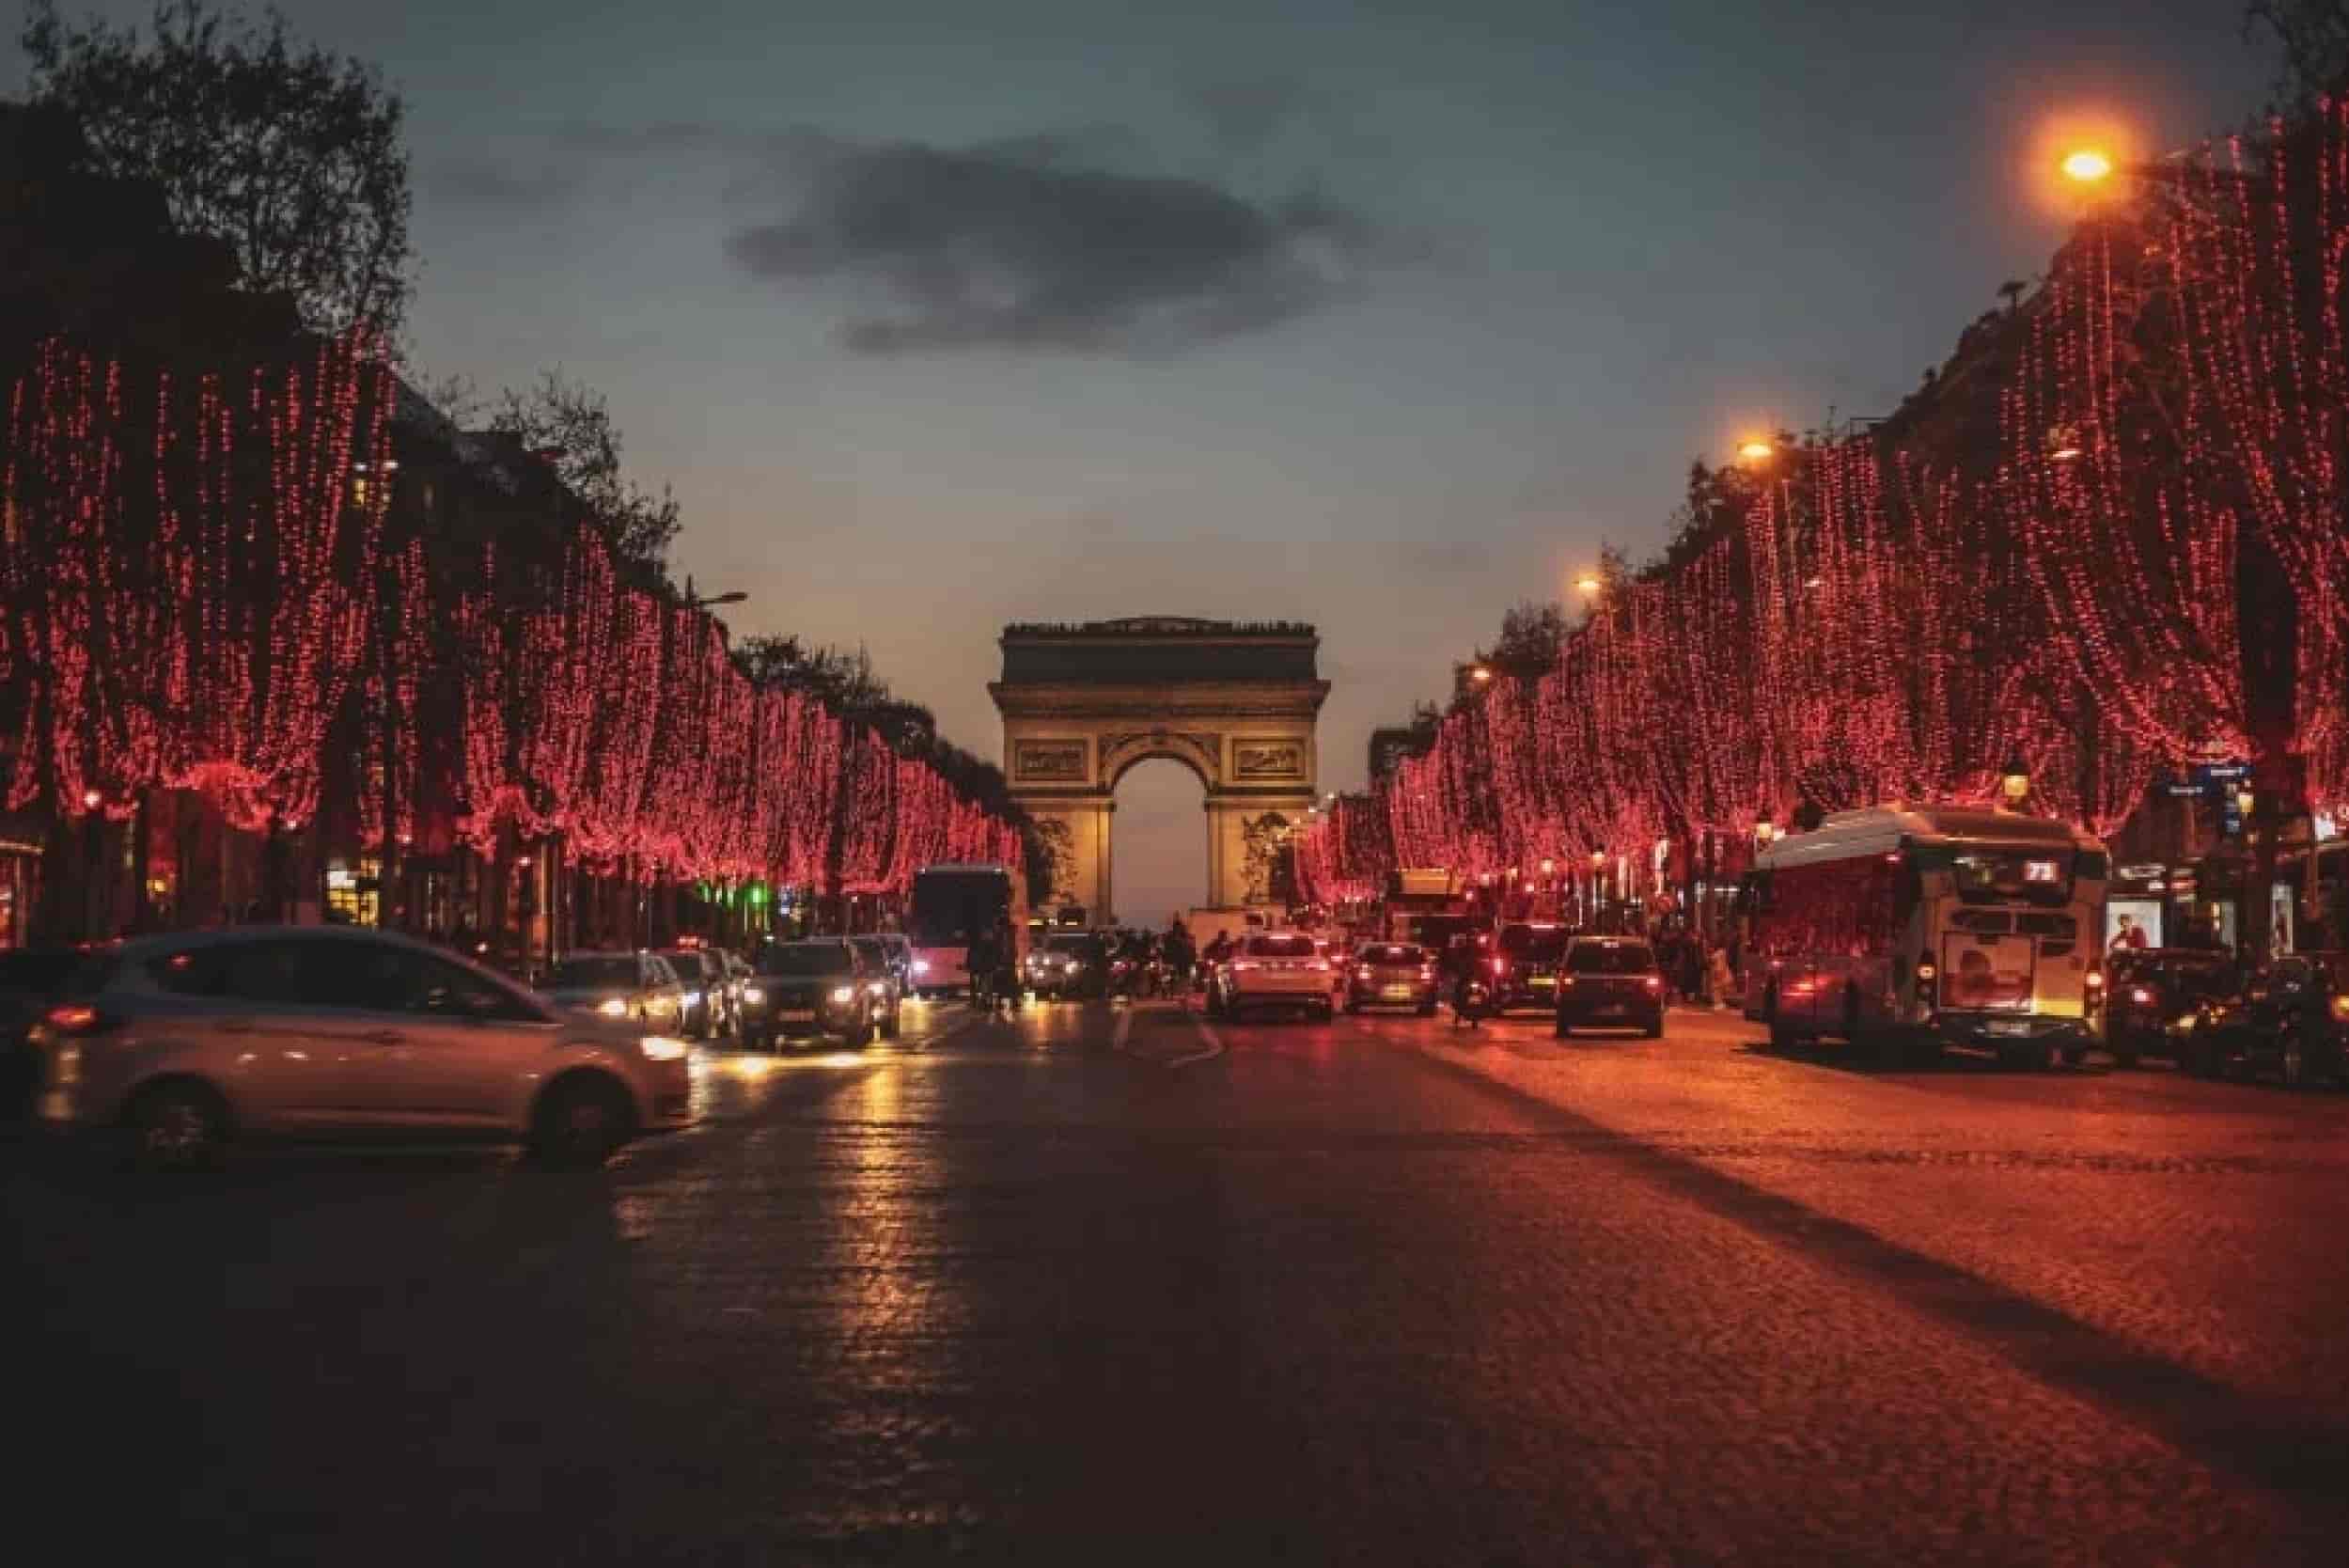 champs-elysees-avenue-with-cards-and-decorated-trees-in-red-lights